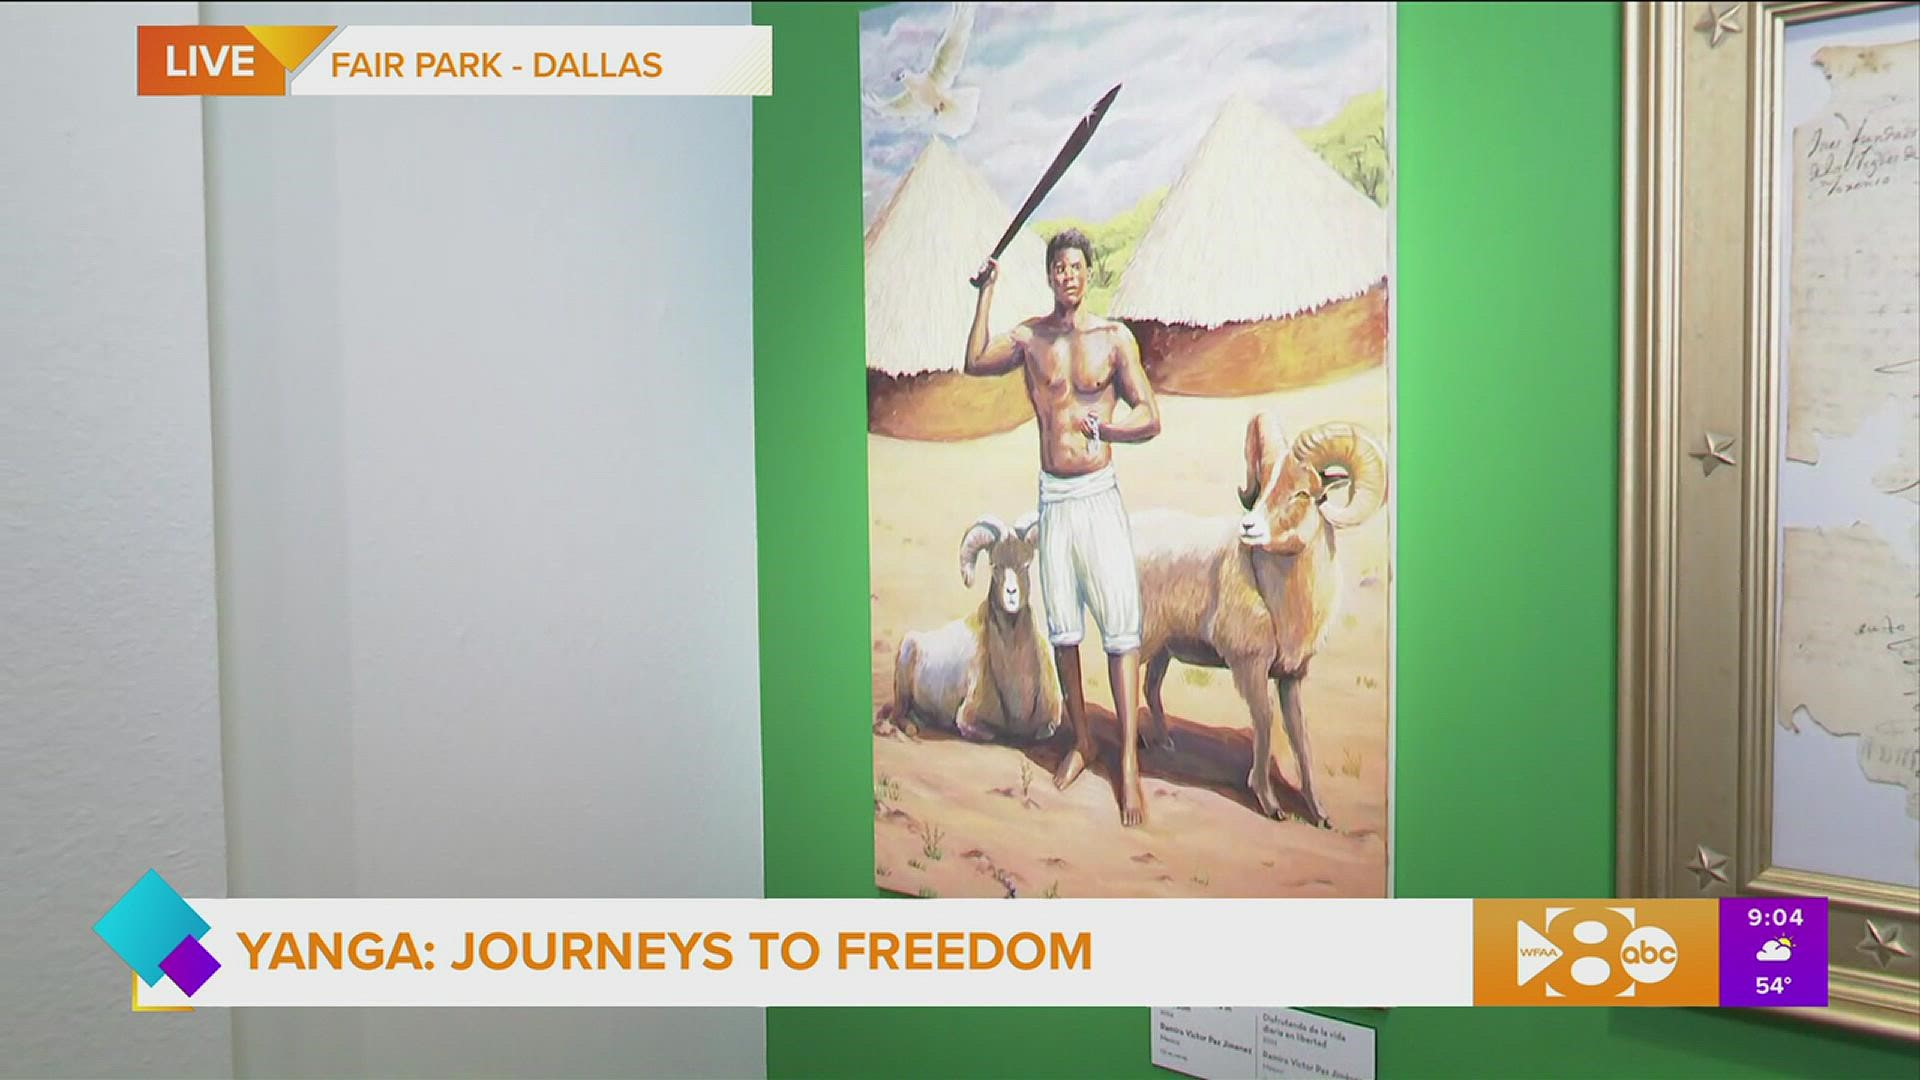 There's a new exhibit at Dallas' African American Museum that explores a largely unknown story of one of the first liberators in America, Gasper Yanga.